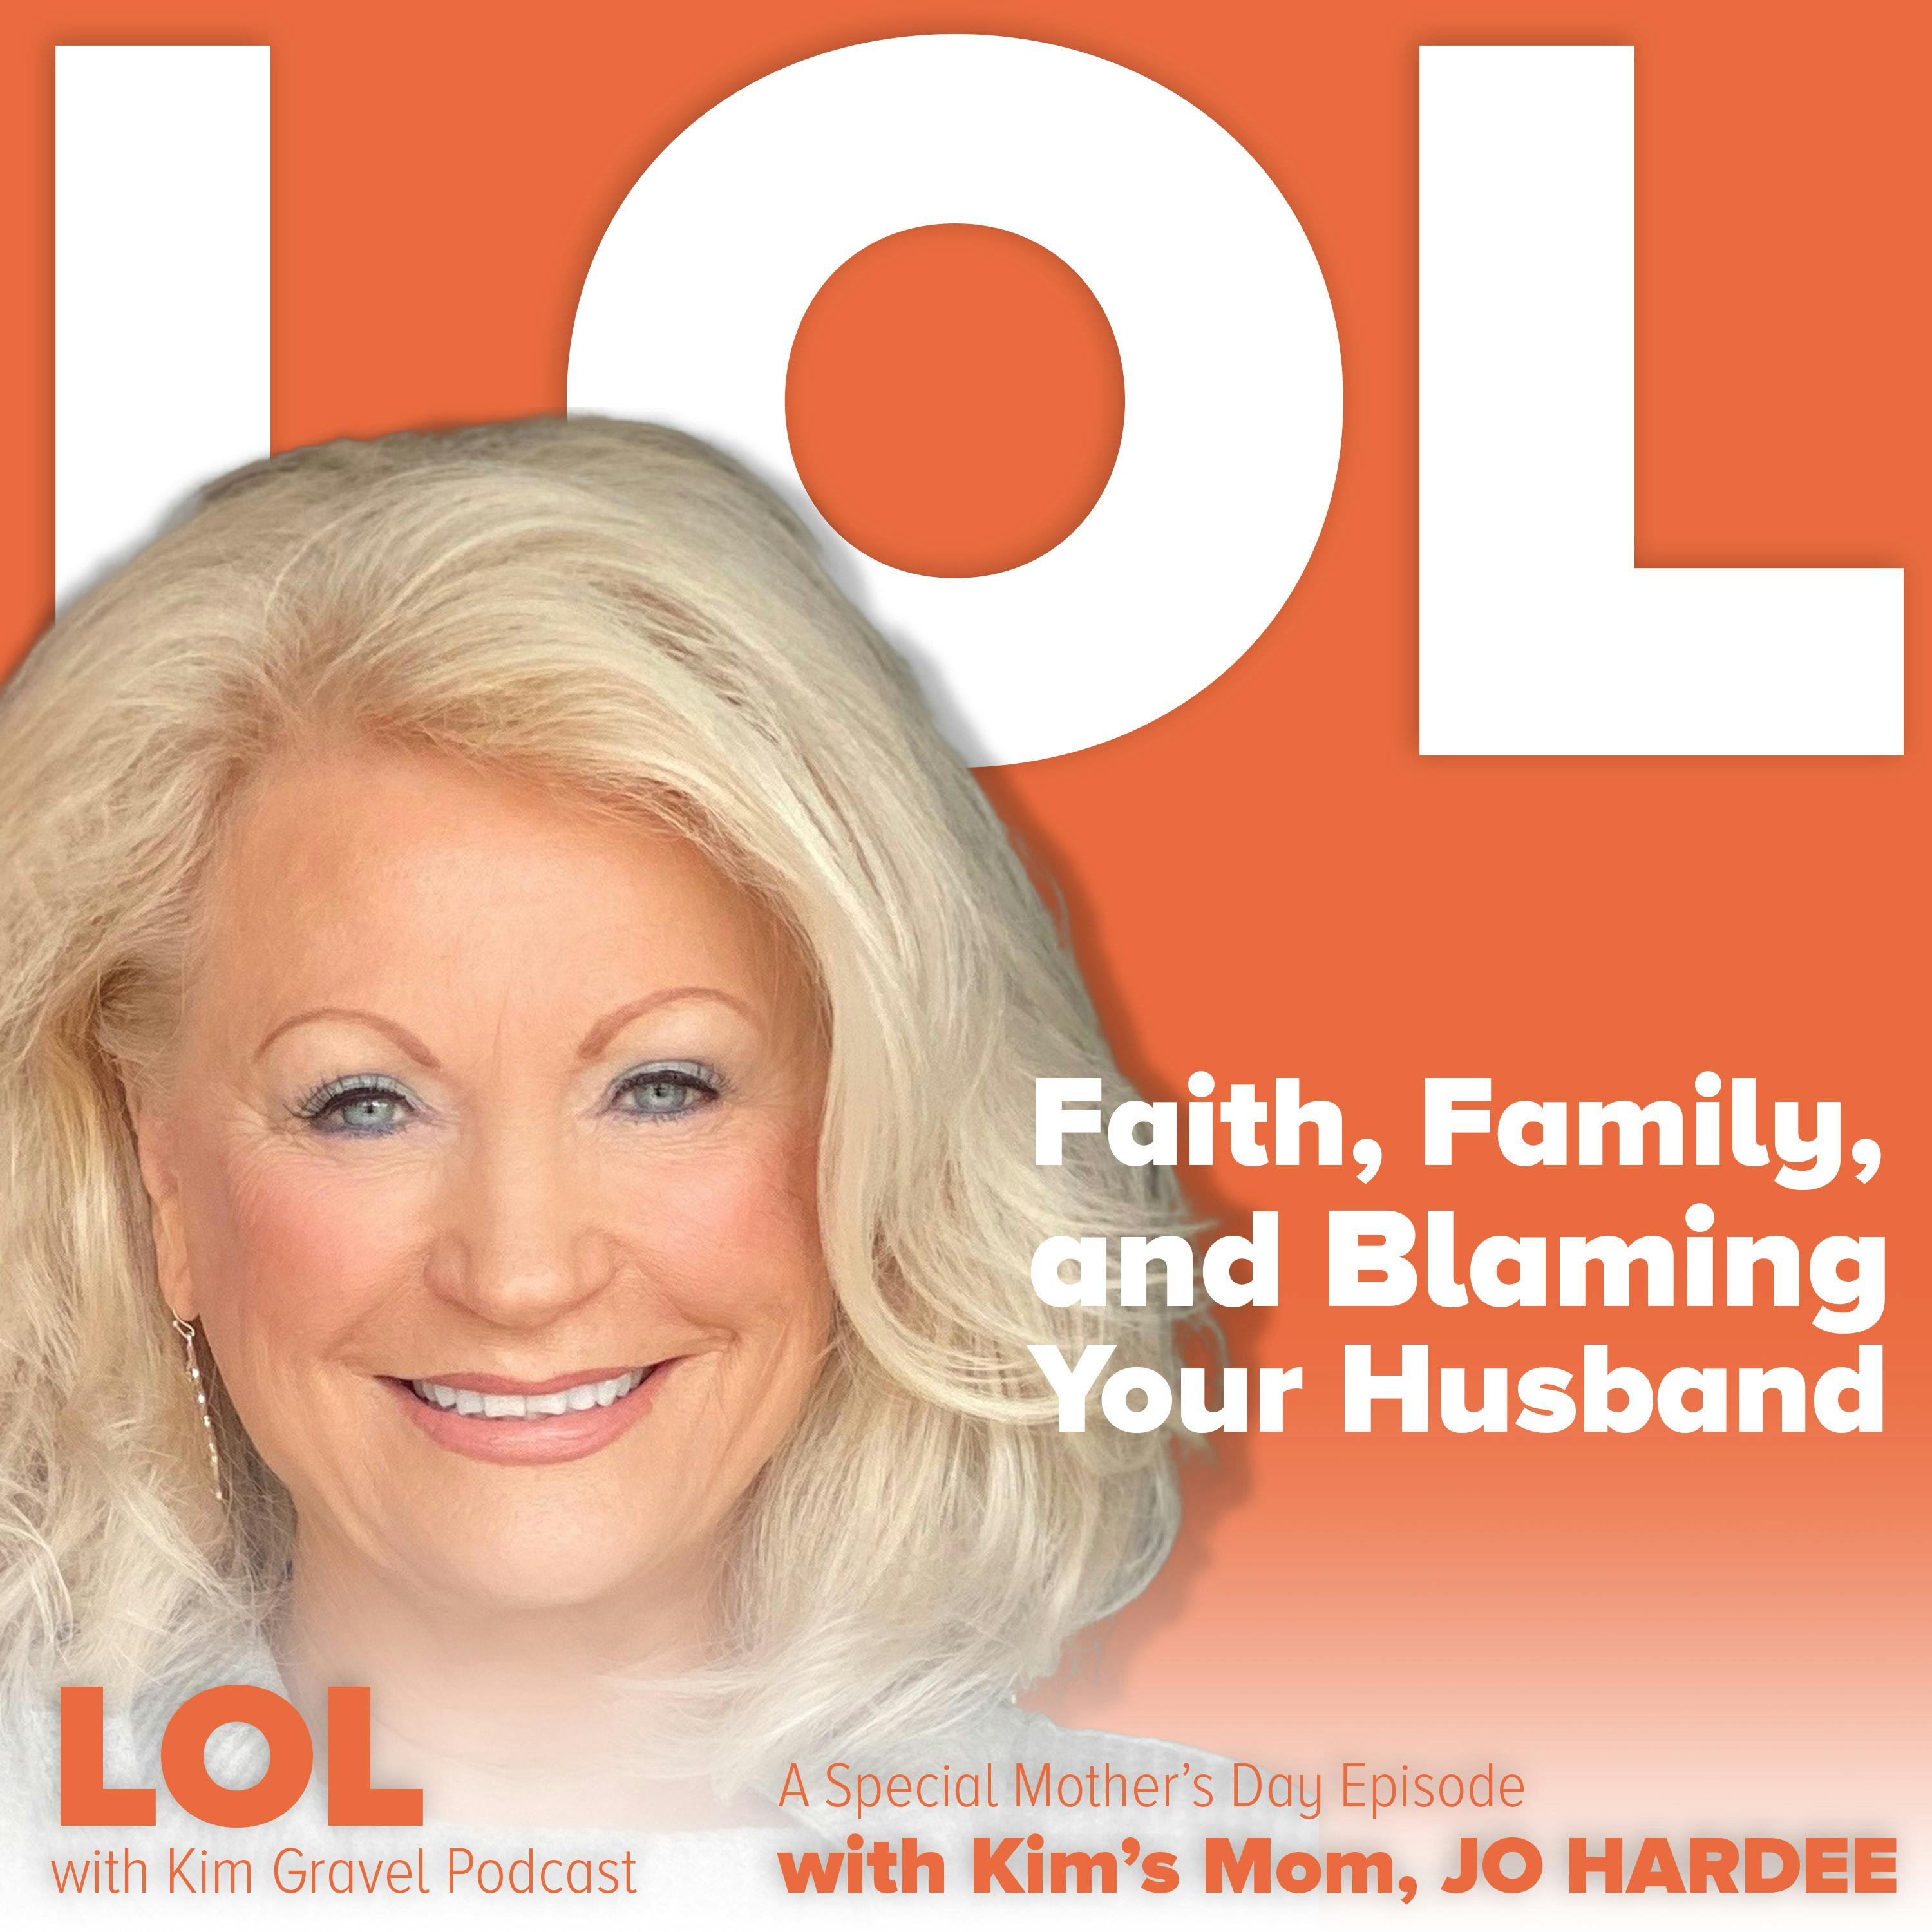 Faith, Family and Blaming Your Husband | A Special Mother’s Day Episode with Kim’s Mom, Jo Hardee